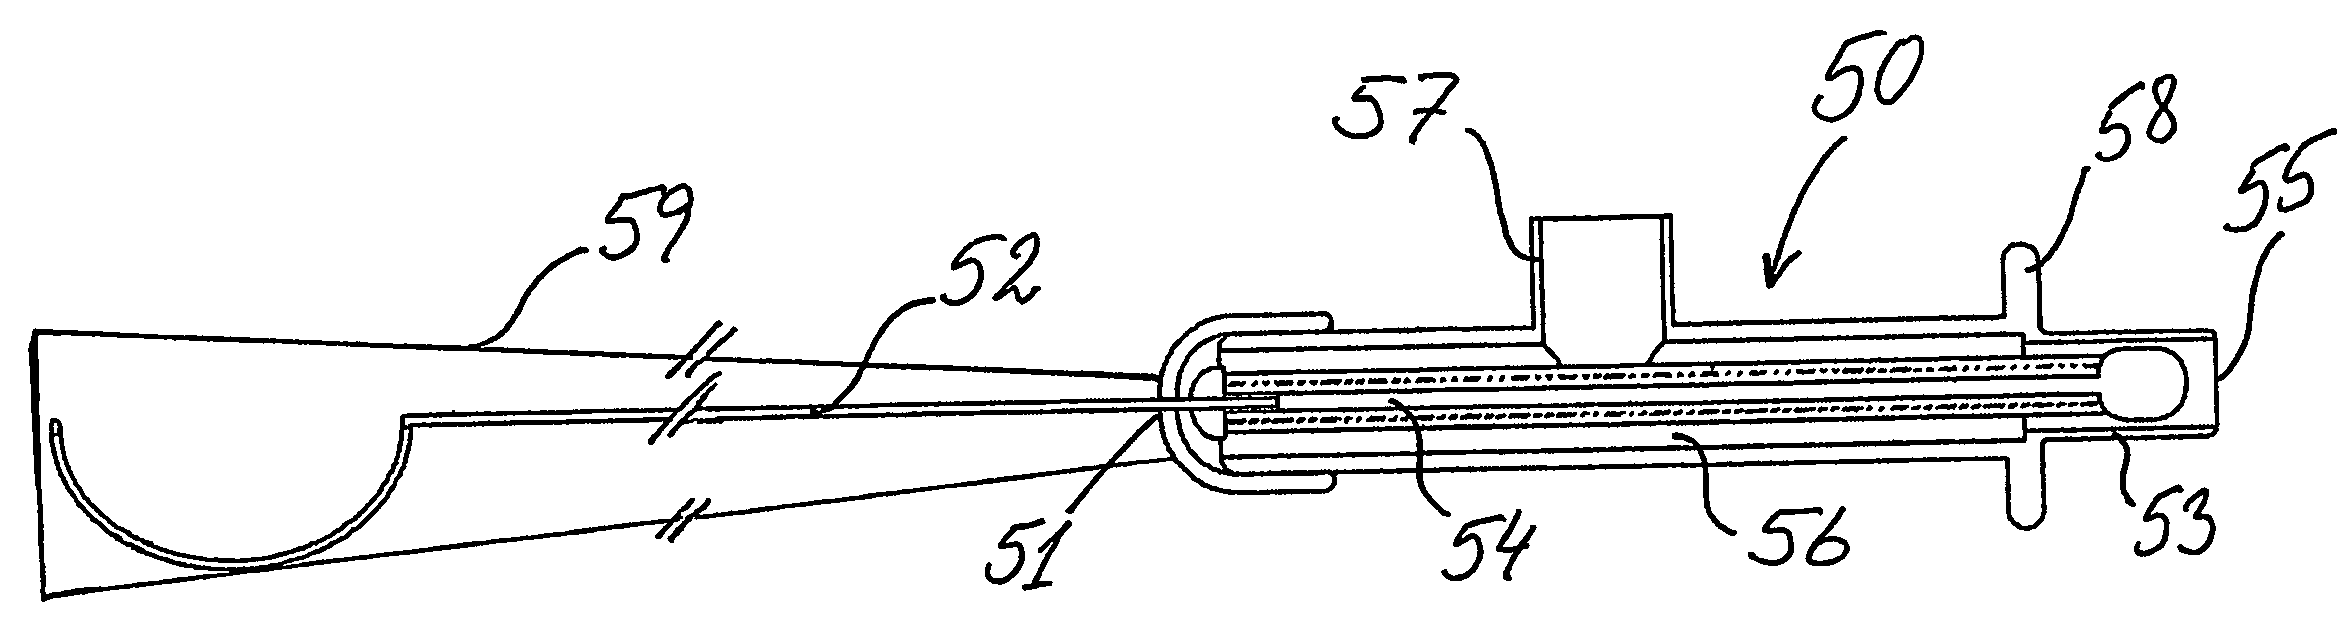 Device for opening a human bladder